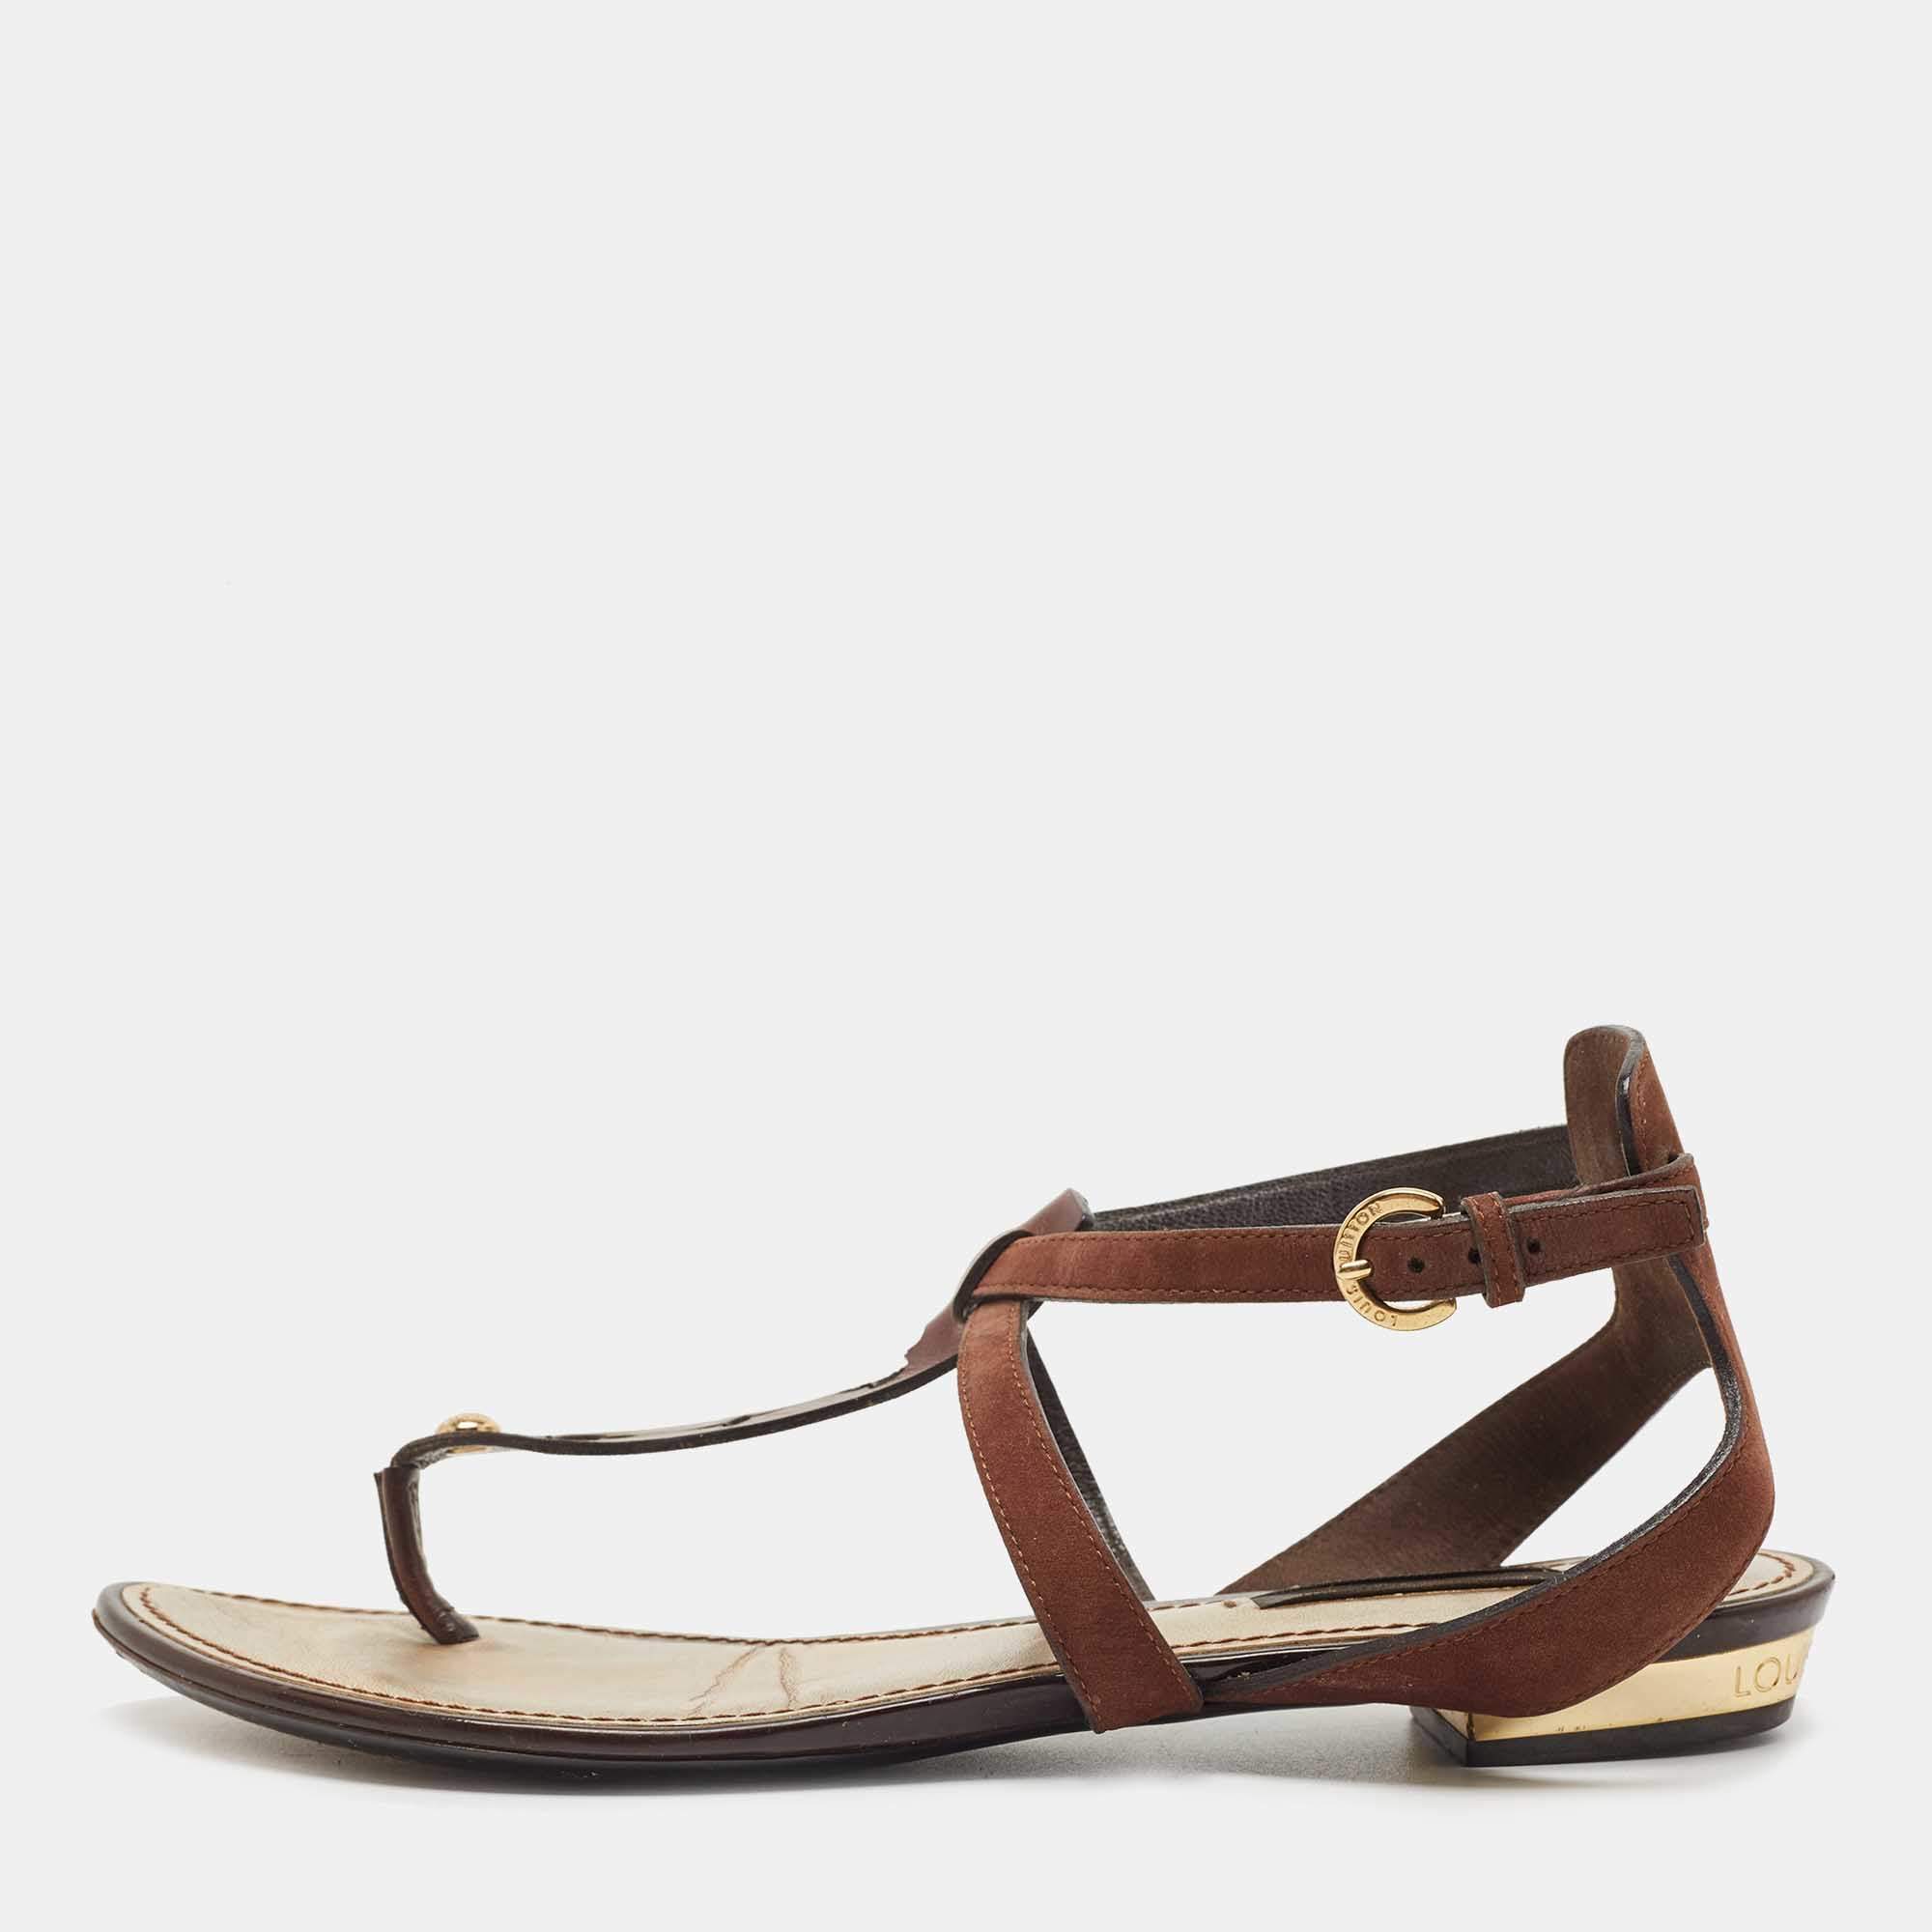 Louis Vuitton Brown Leather Ankle Strap Flat Sandals